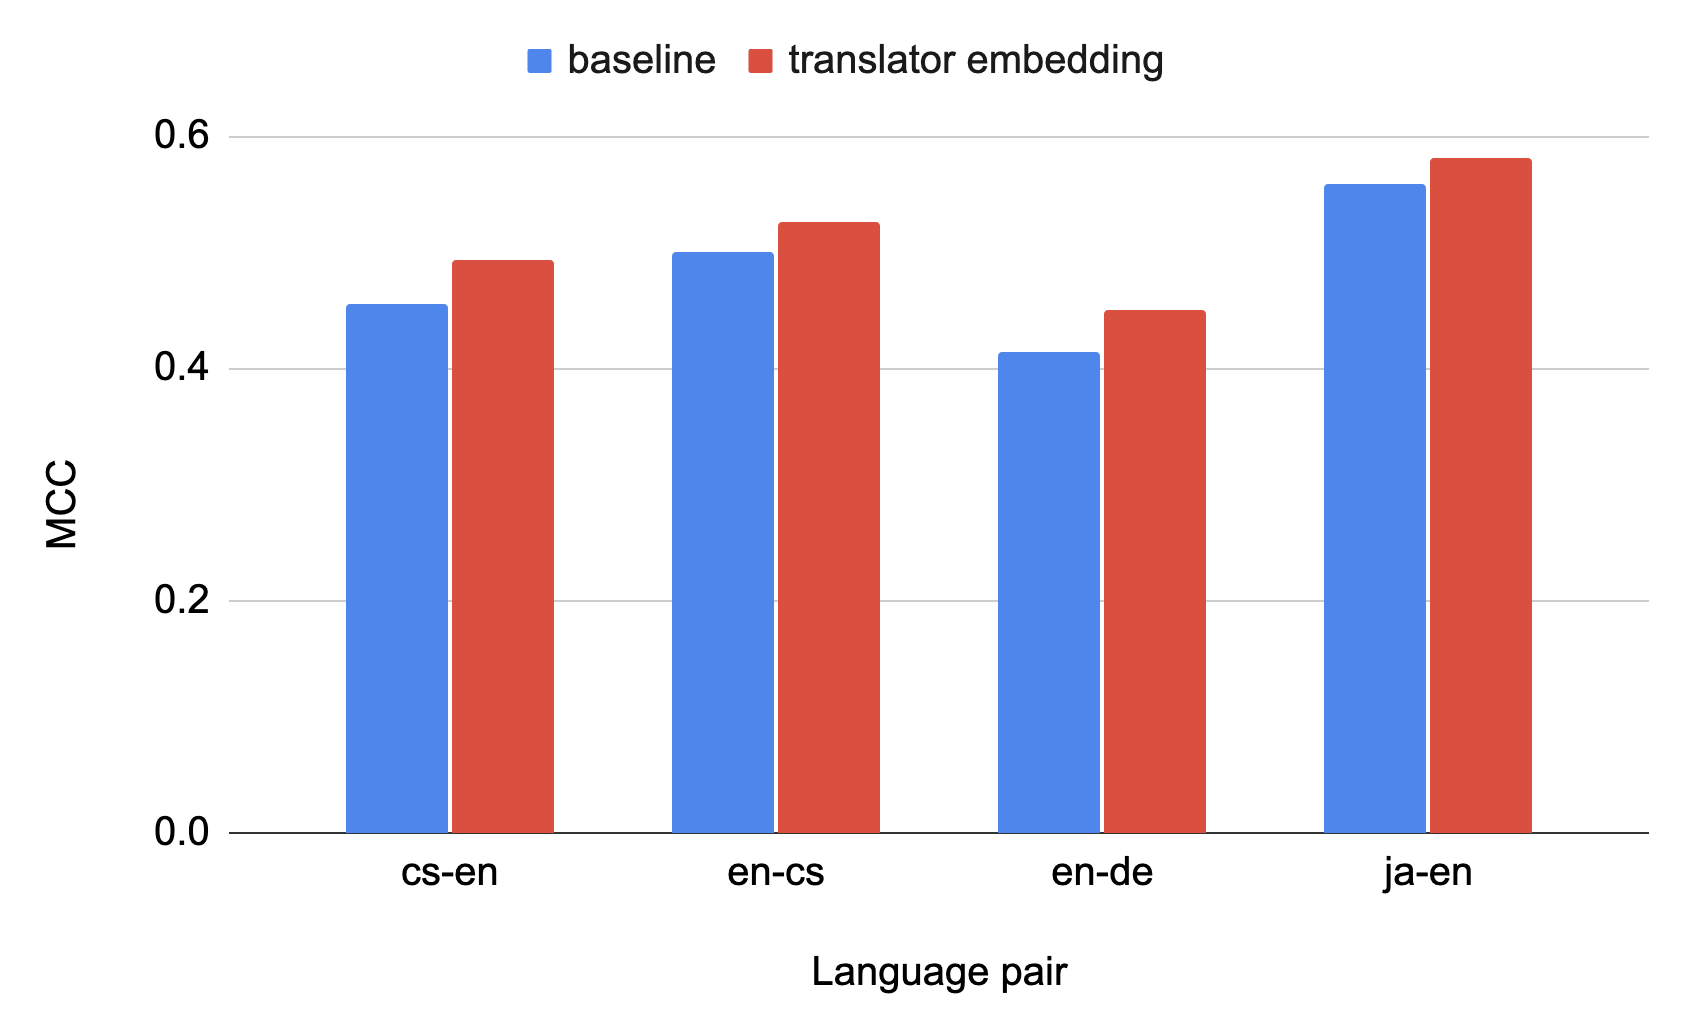 the accuracy of the predictions increases with translator embedding